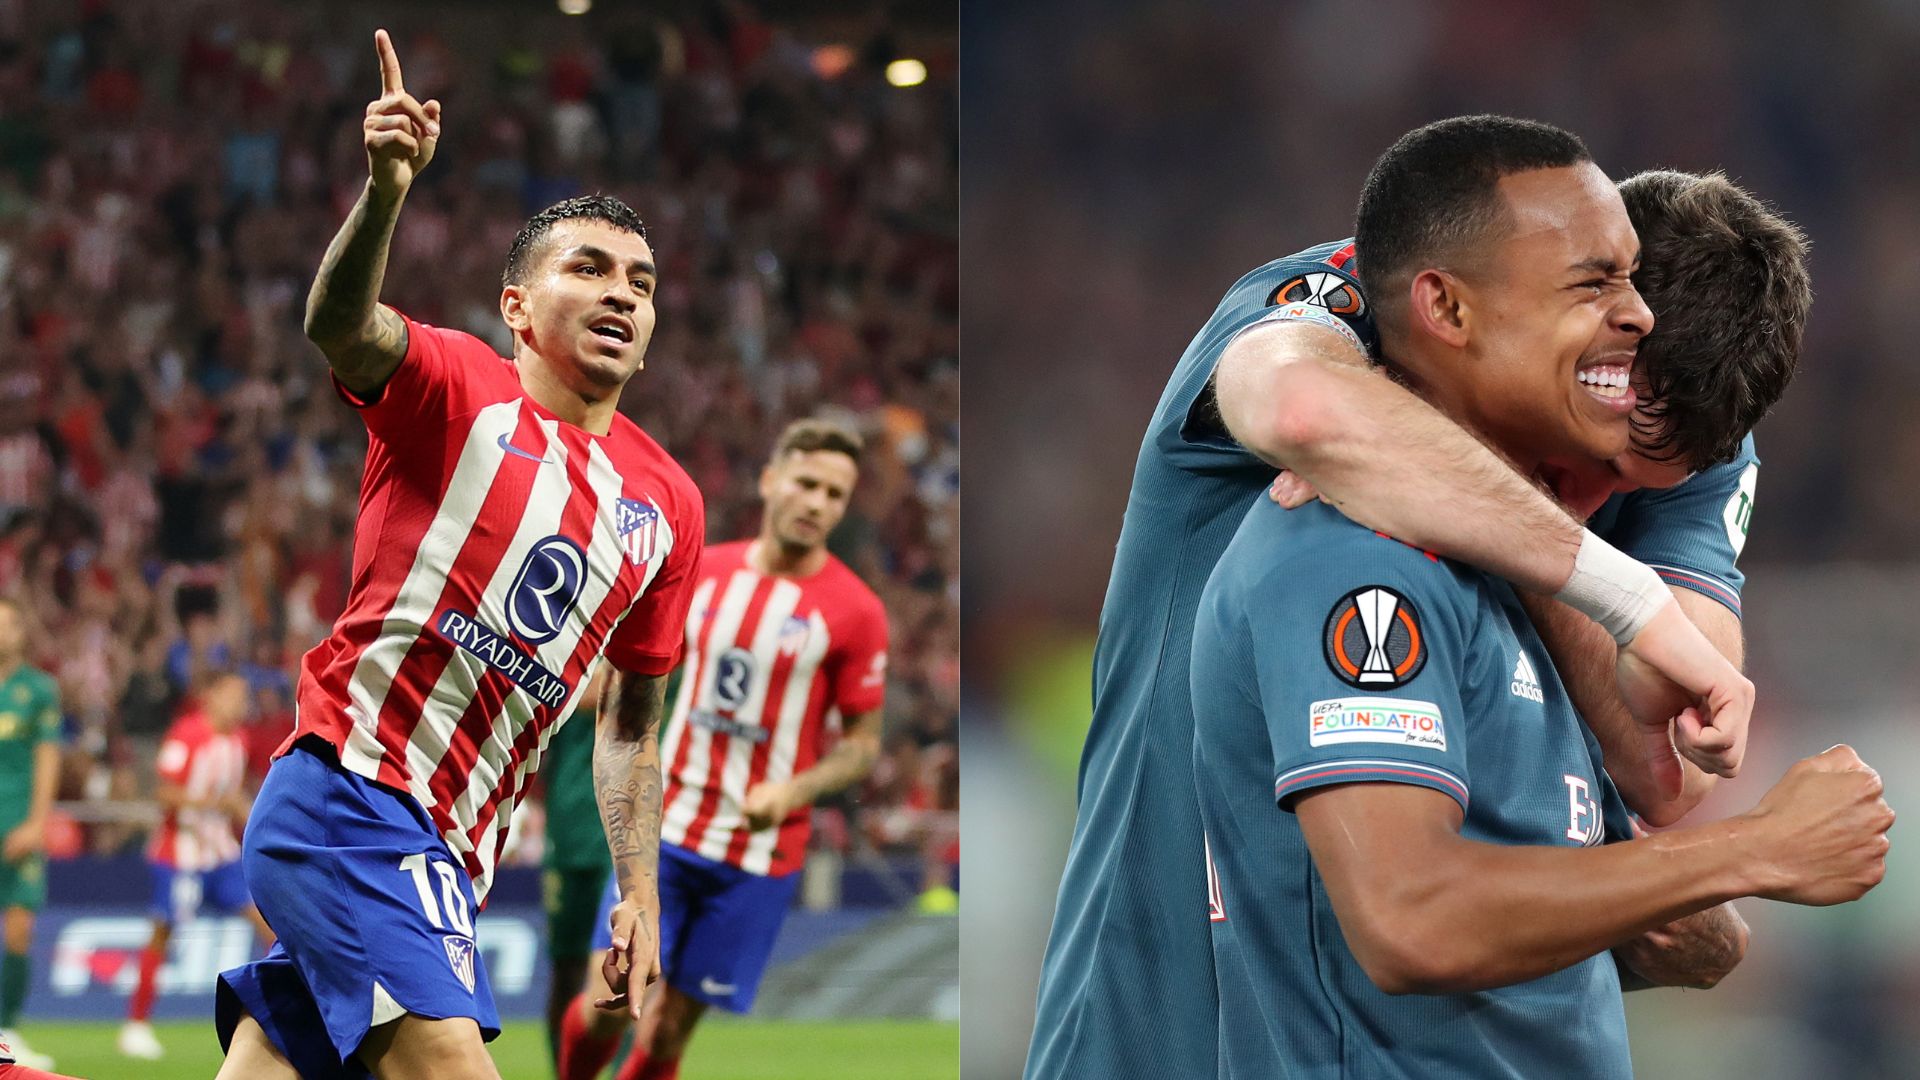 America MG vs Atletico GO: An Exciting Clash with a Lot at Stake